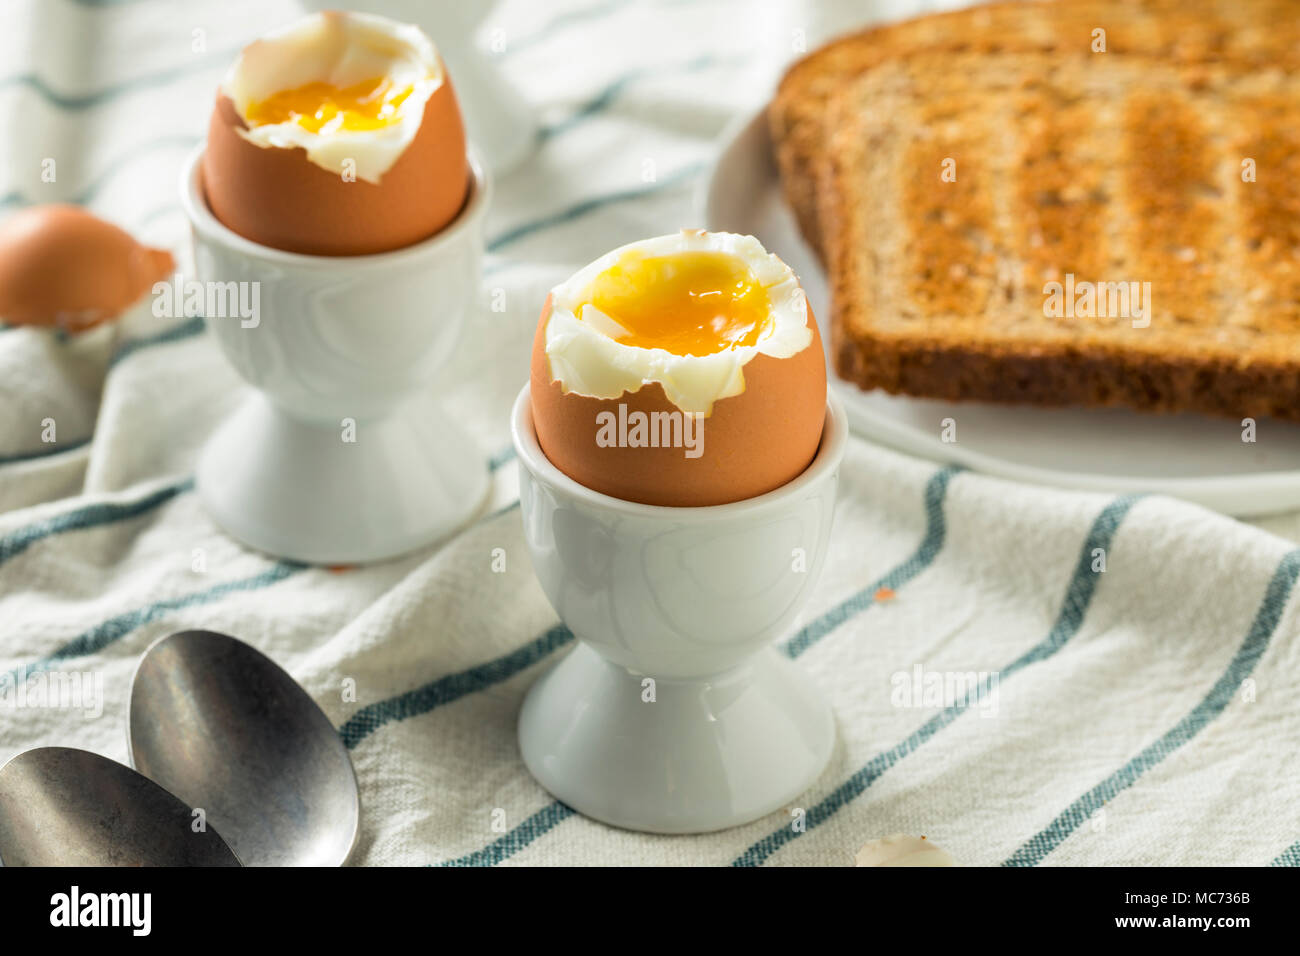 Homemade Soft Boiled Egg in a Cup with Toast Stock Photo - Alamy